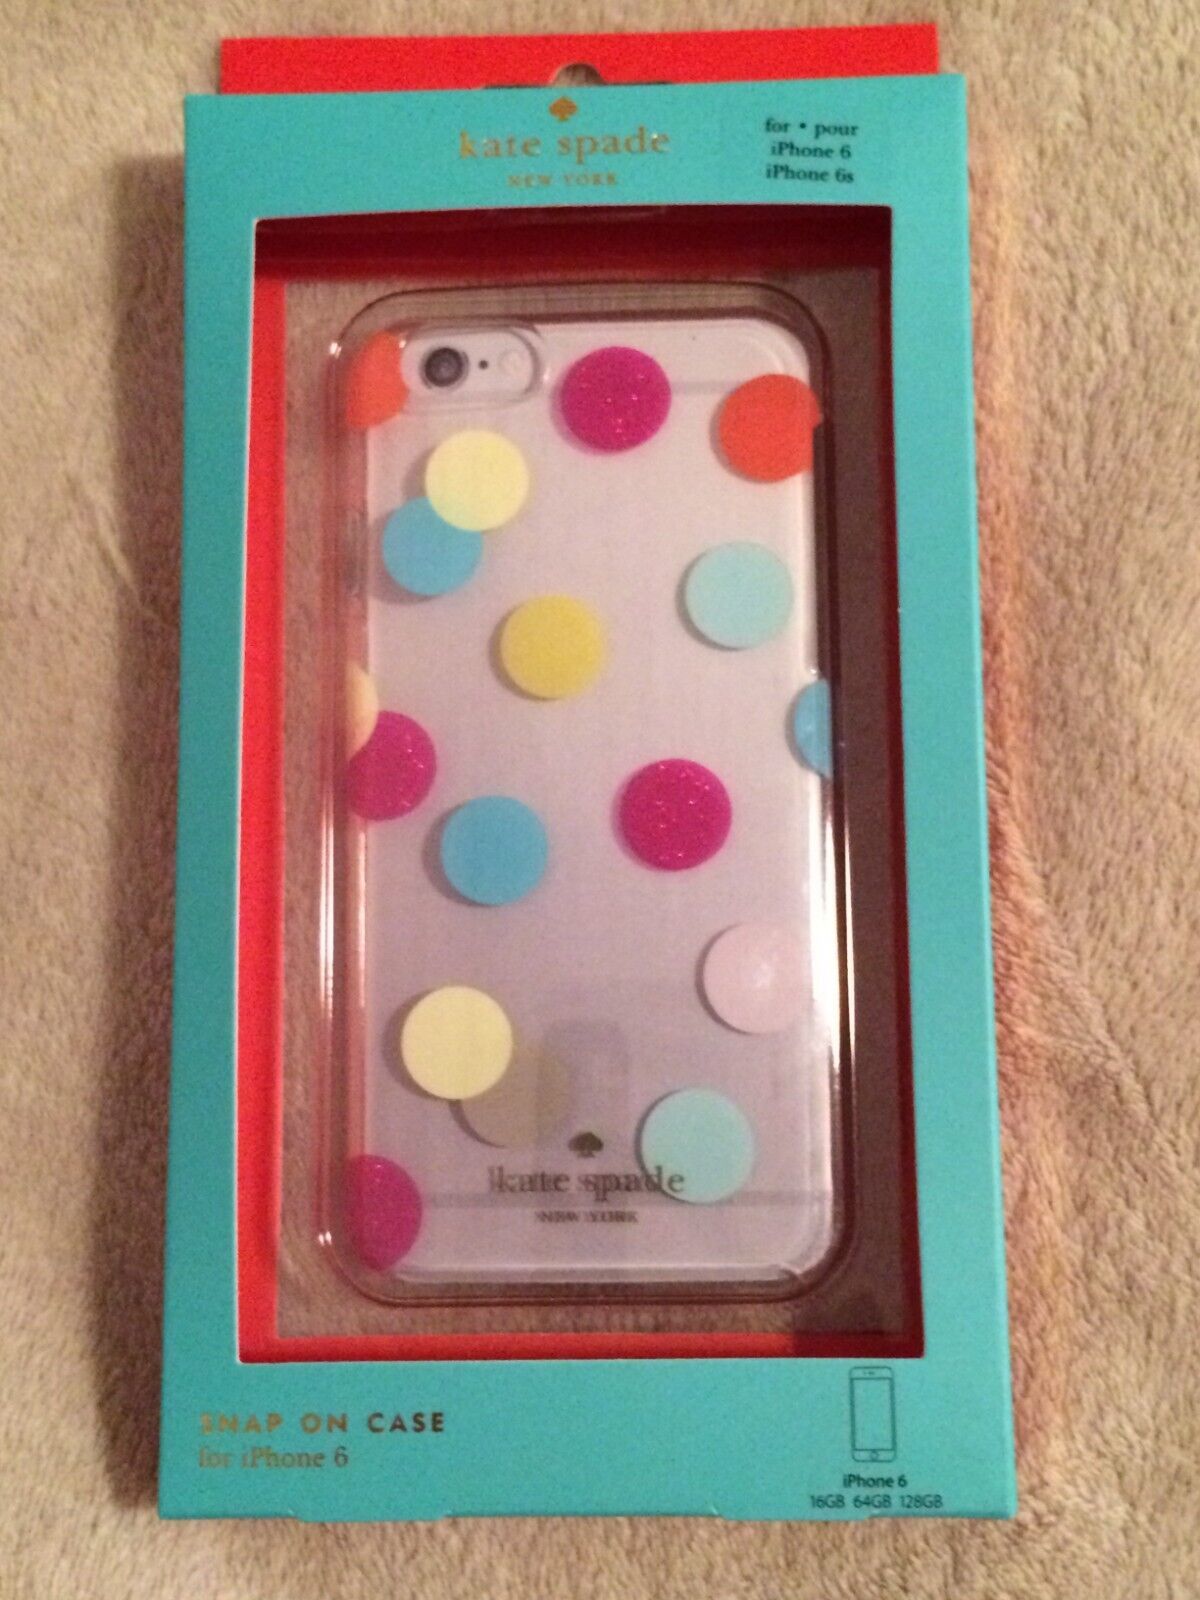 Kate Spade iPhone Case!!! NEW IN PACKAGE - $14.99